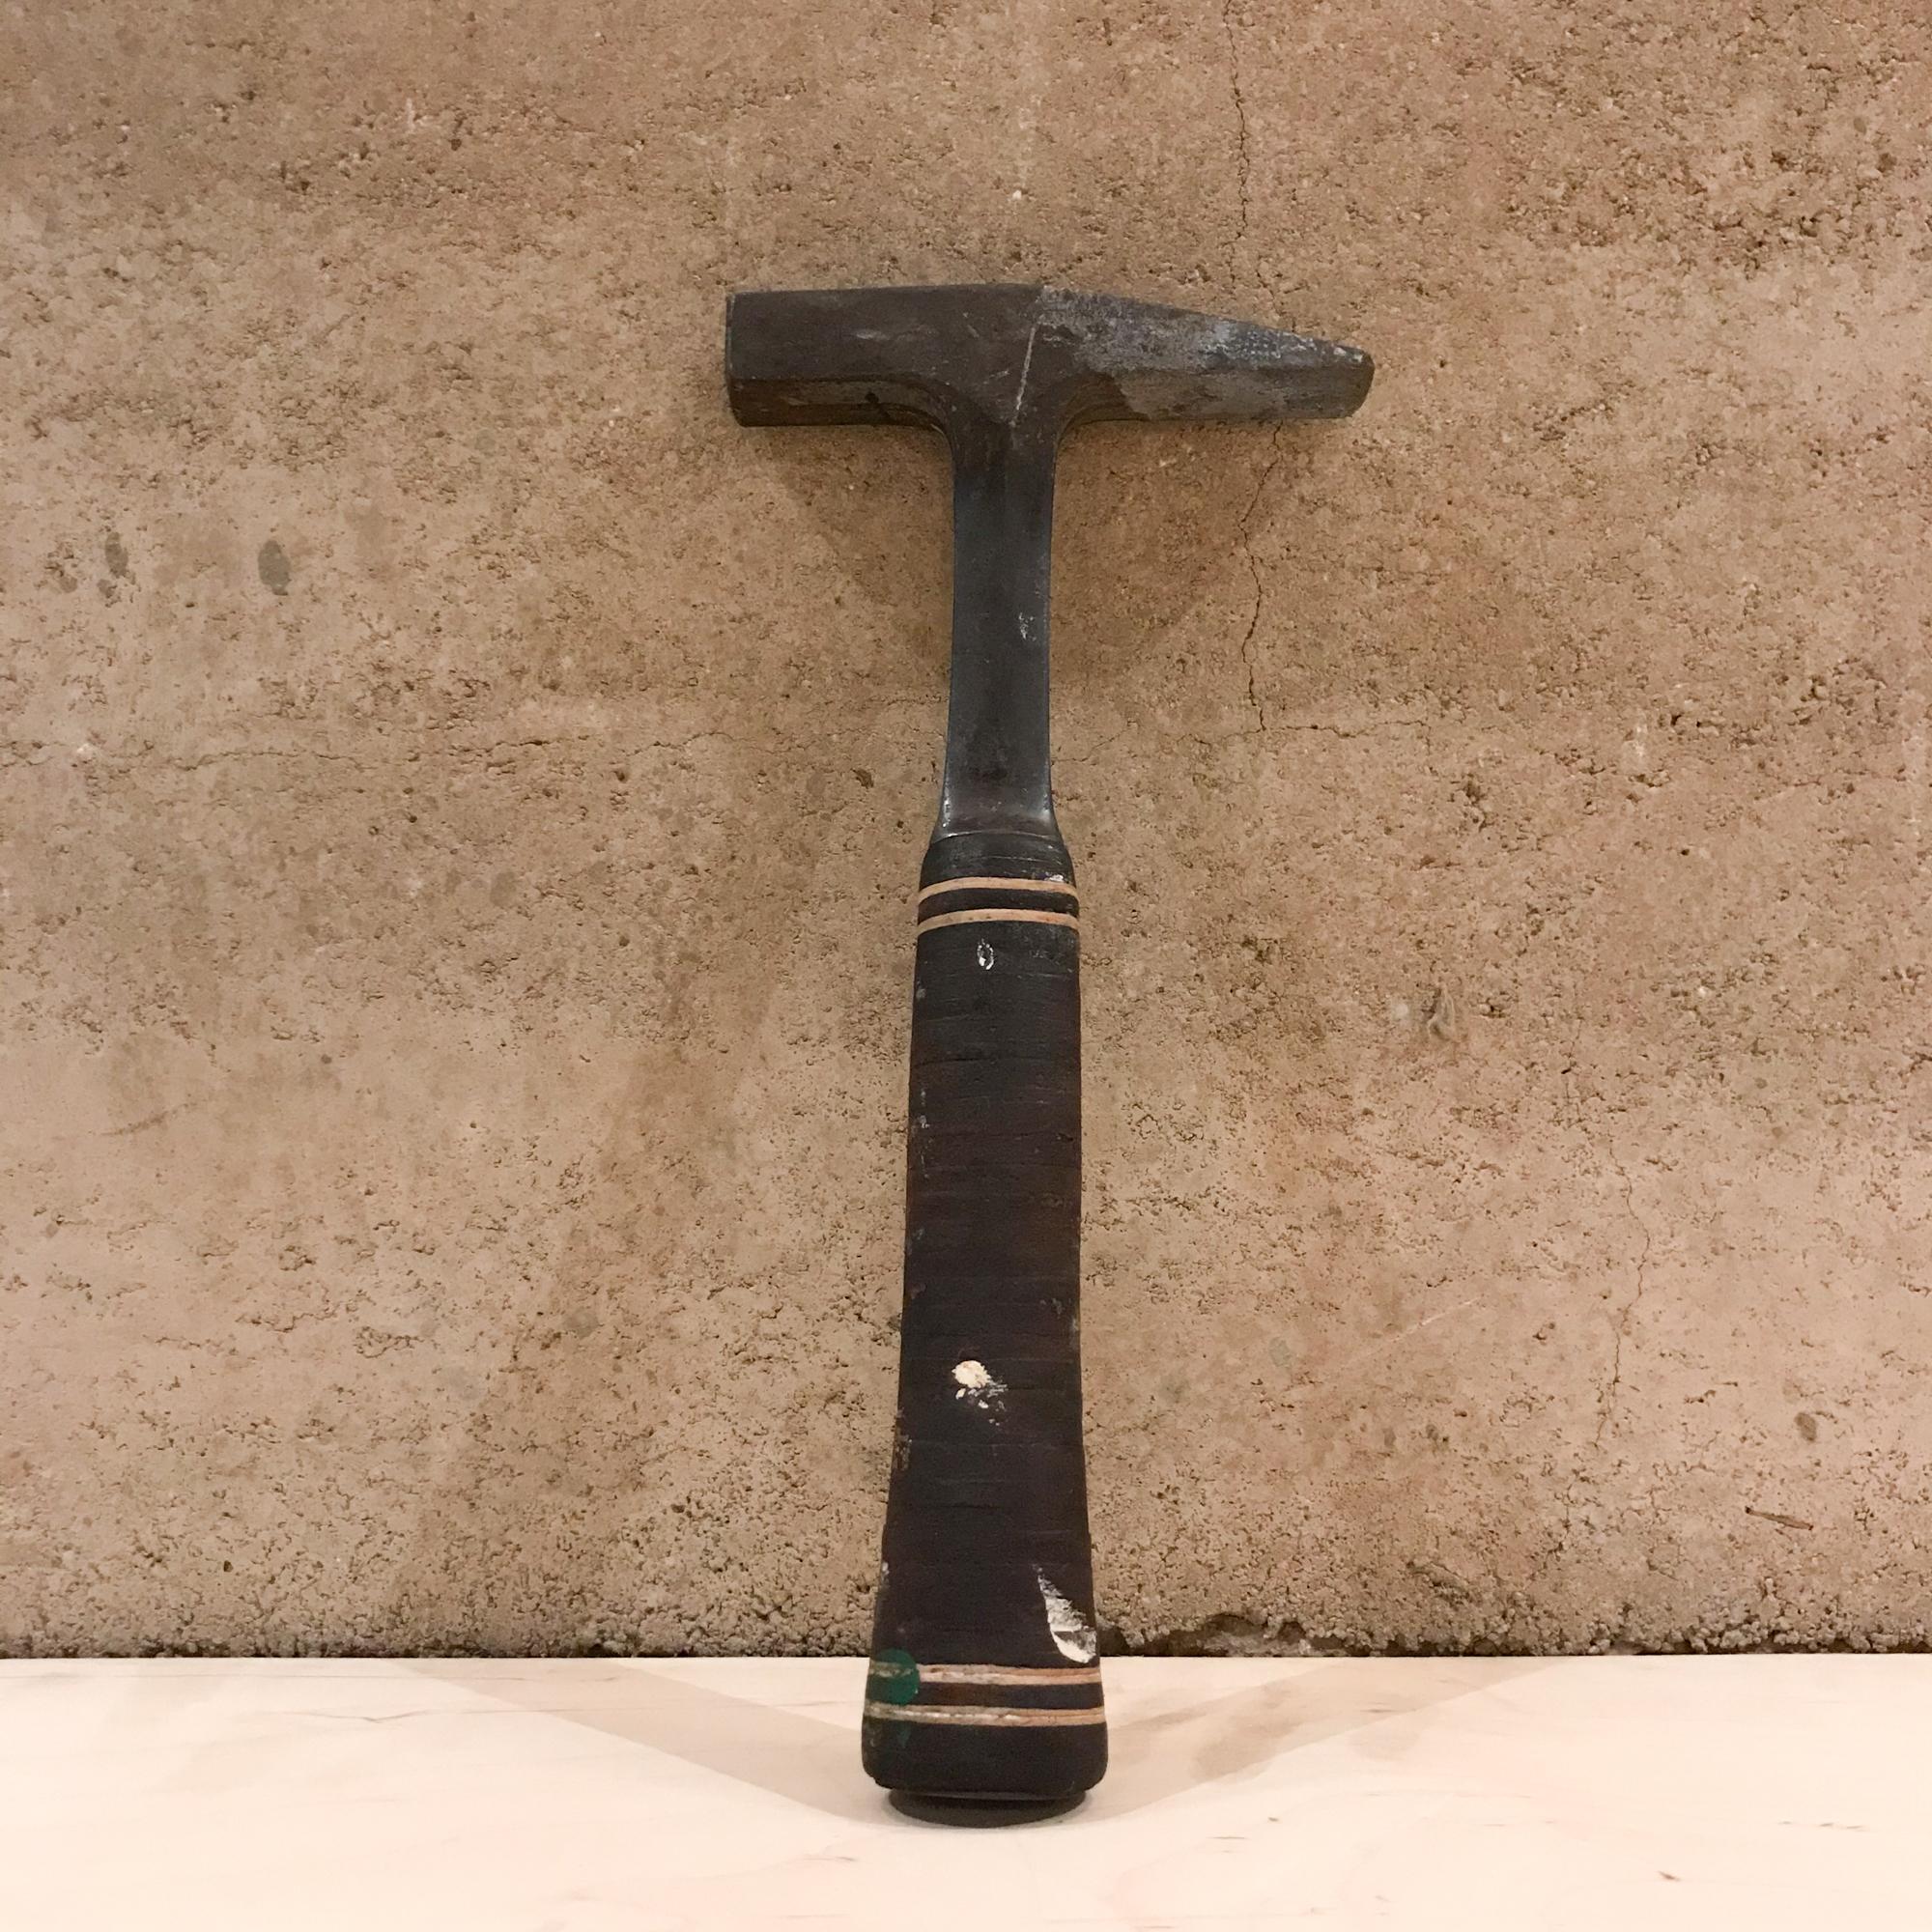 Tool
Vintage Rock Fossil Geological Cement Pick Hammer full of character and history
Comfy Leather Grip Handle with Great Balance. By Estwing Illinois USA
Measures: 12 L x 5.5W x 1 Thick
Original Unrestored Vintage Condition Item Preowned Well Used